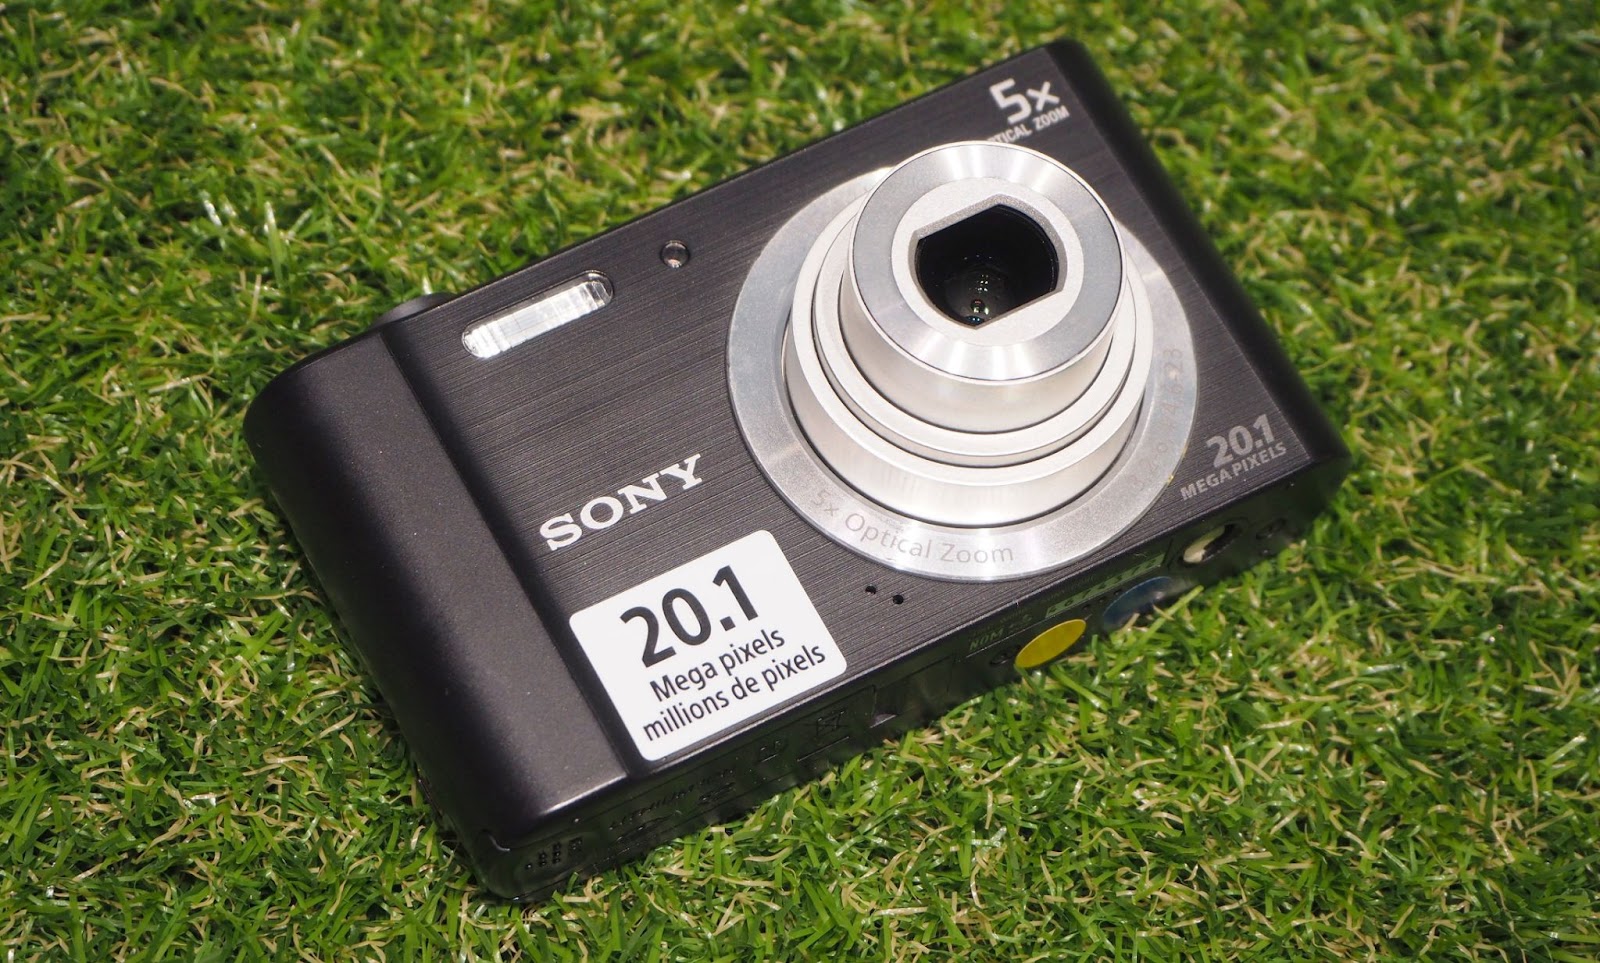 Sony Cyber-shot W800: Compact Camera for Beginners